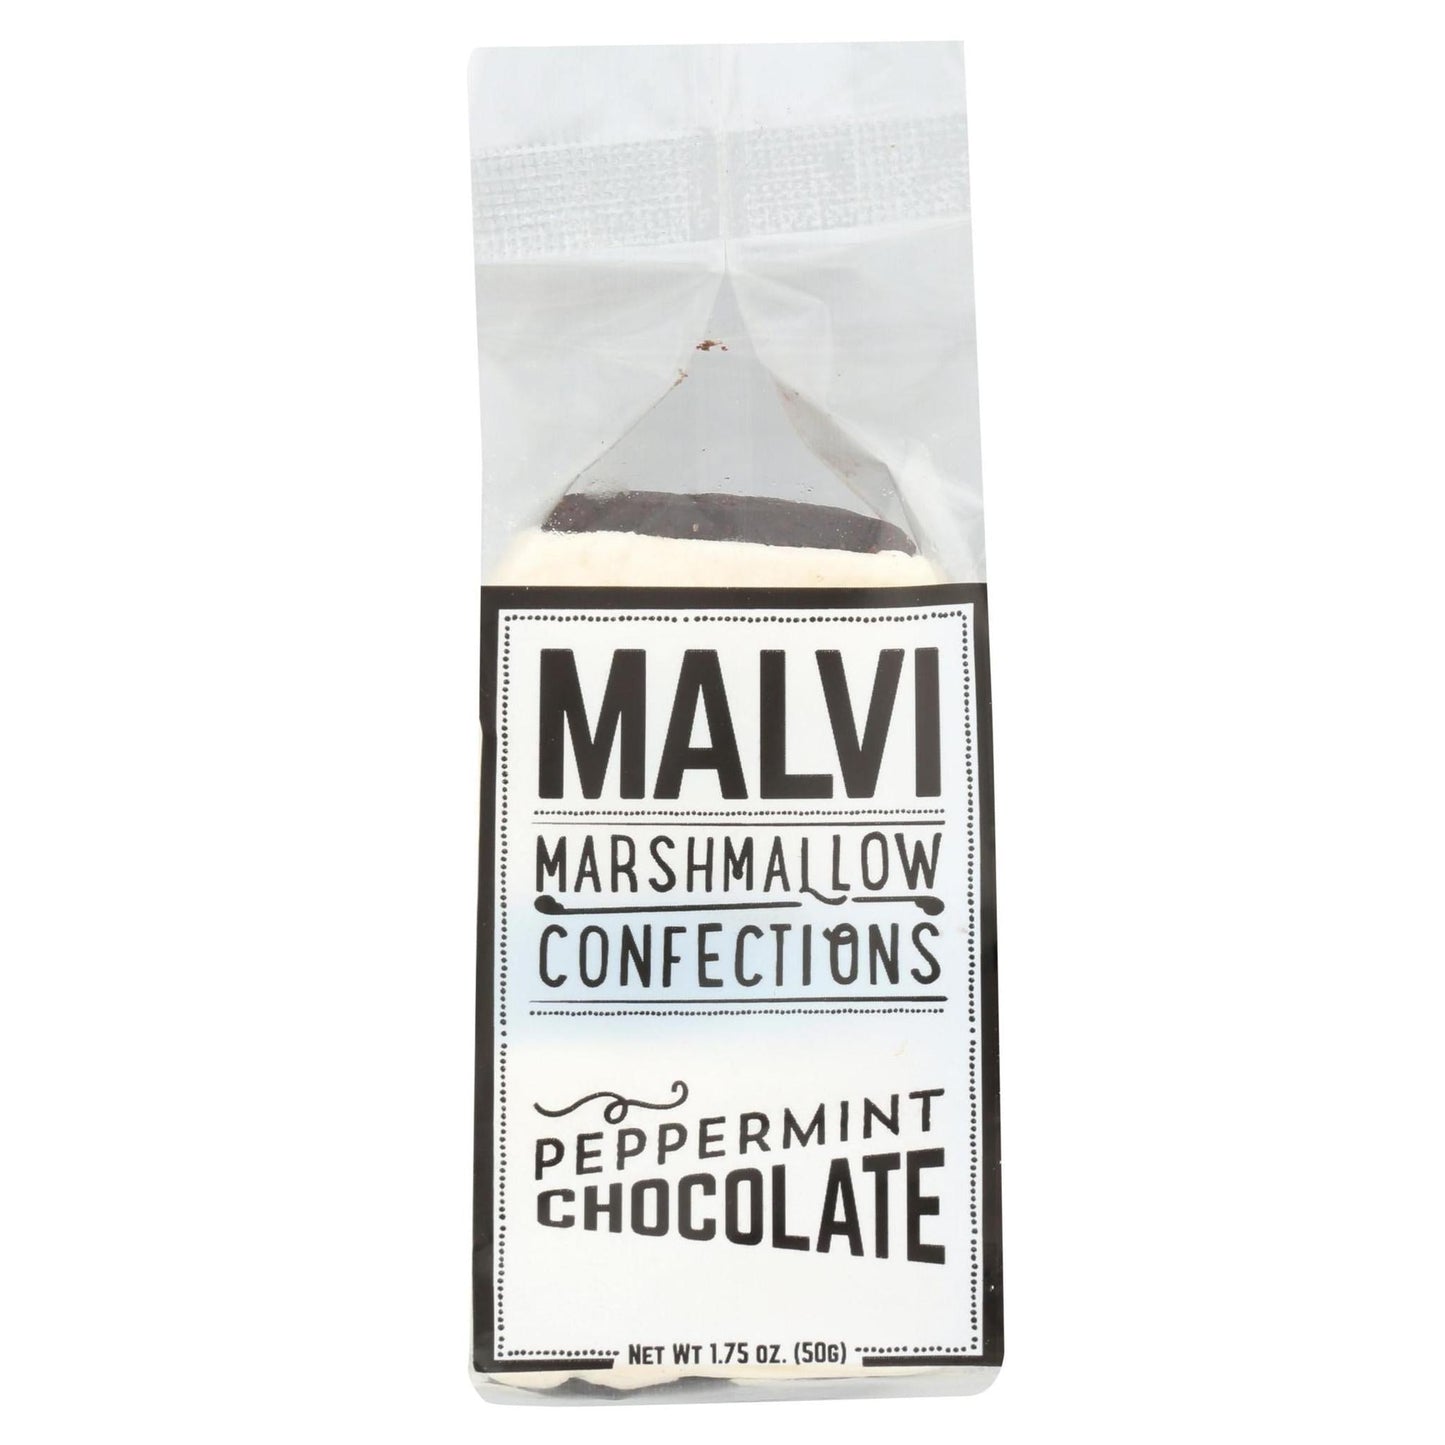 Malvi Marshmallow - 'Peppermint Chocolate' S'Mores (2PK) - The Epicurean Trader